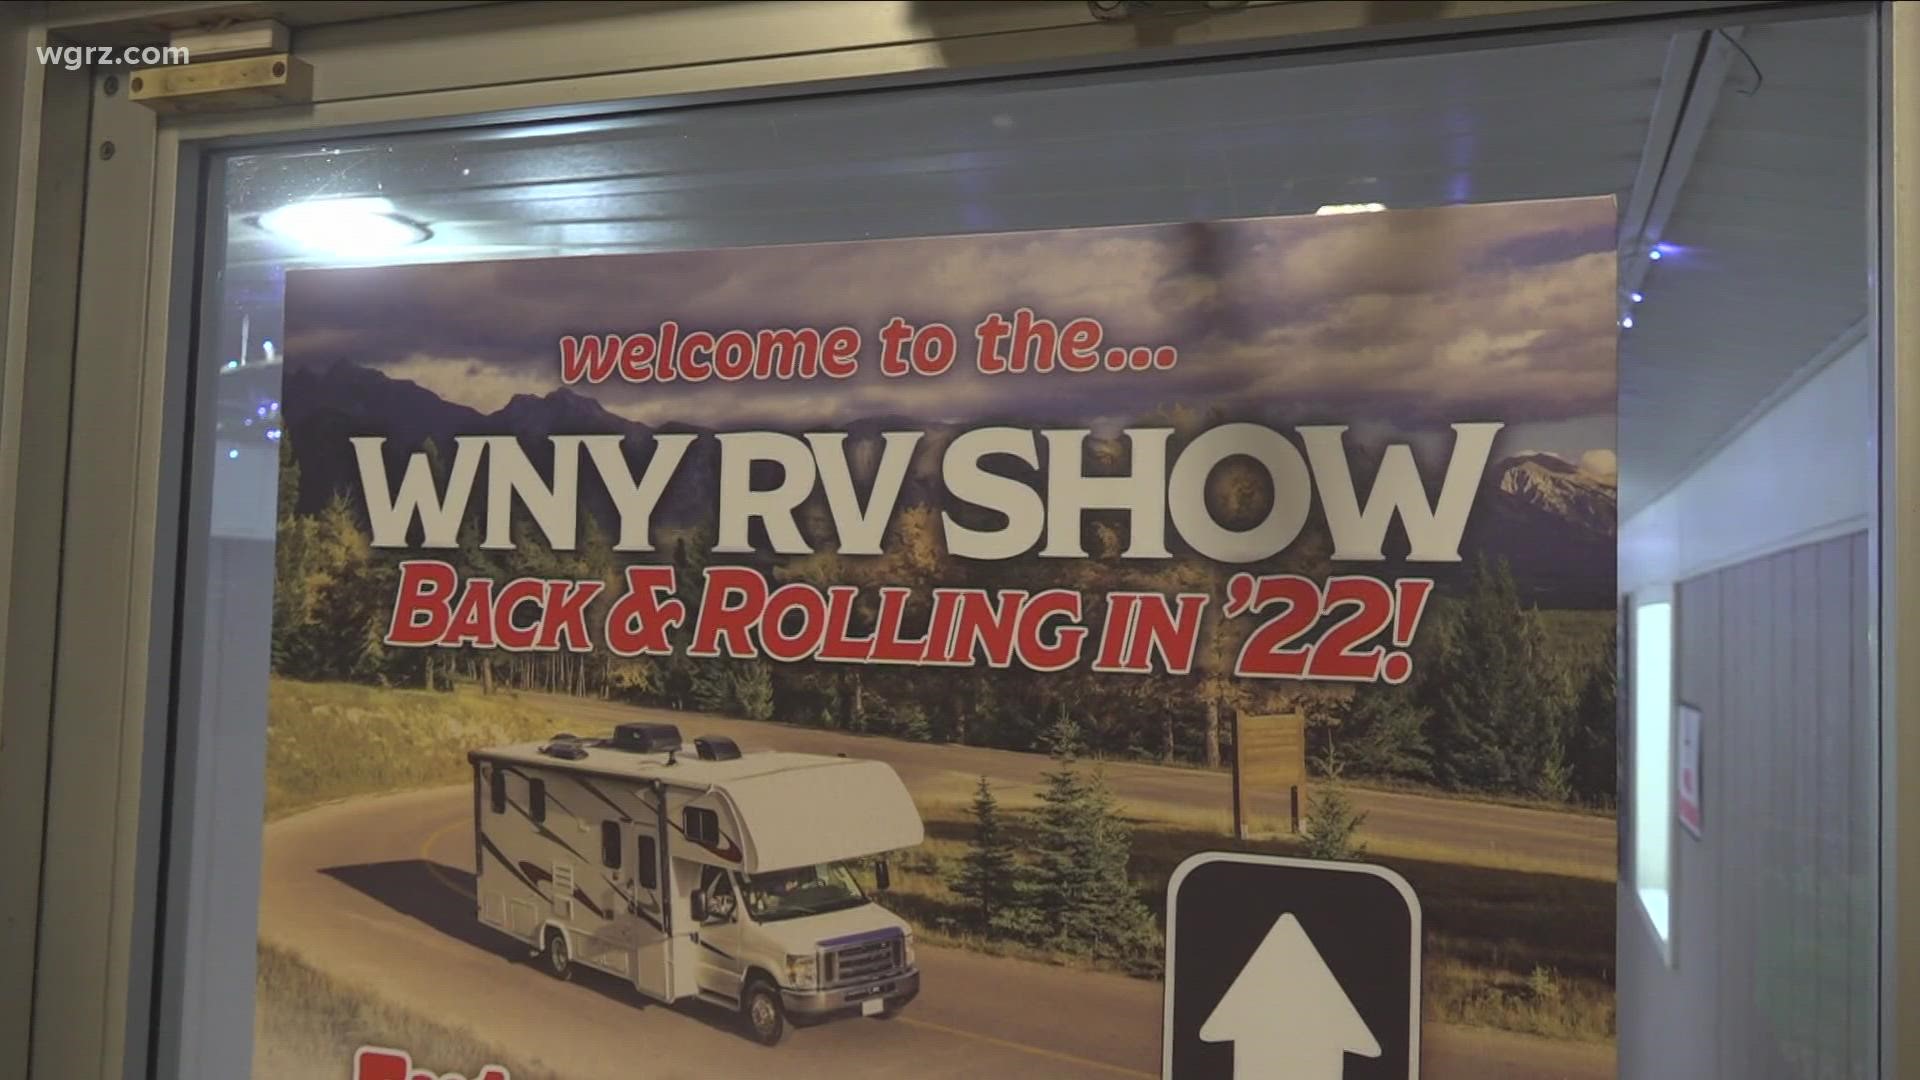 2 On Your Side's Kevin O'Neill takes you on a tour of the different campers and RVs on display ahead of the RV Show's final weekend.